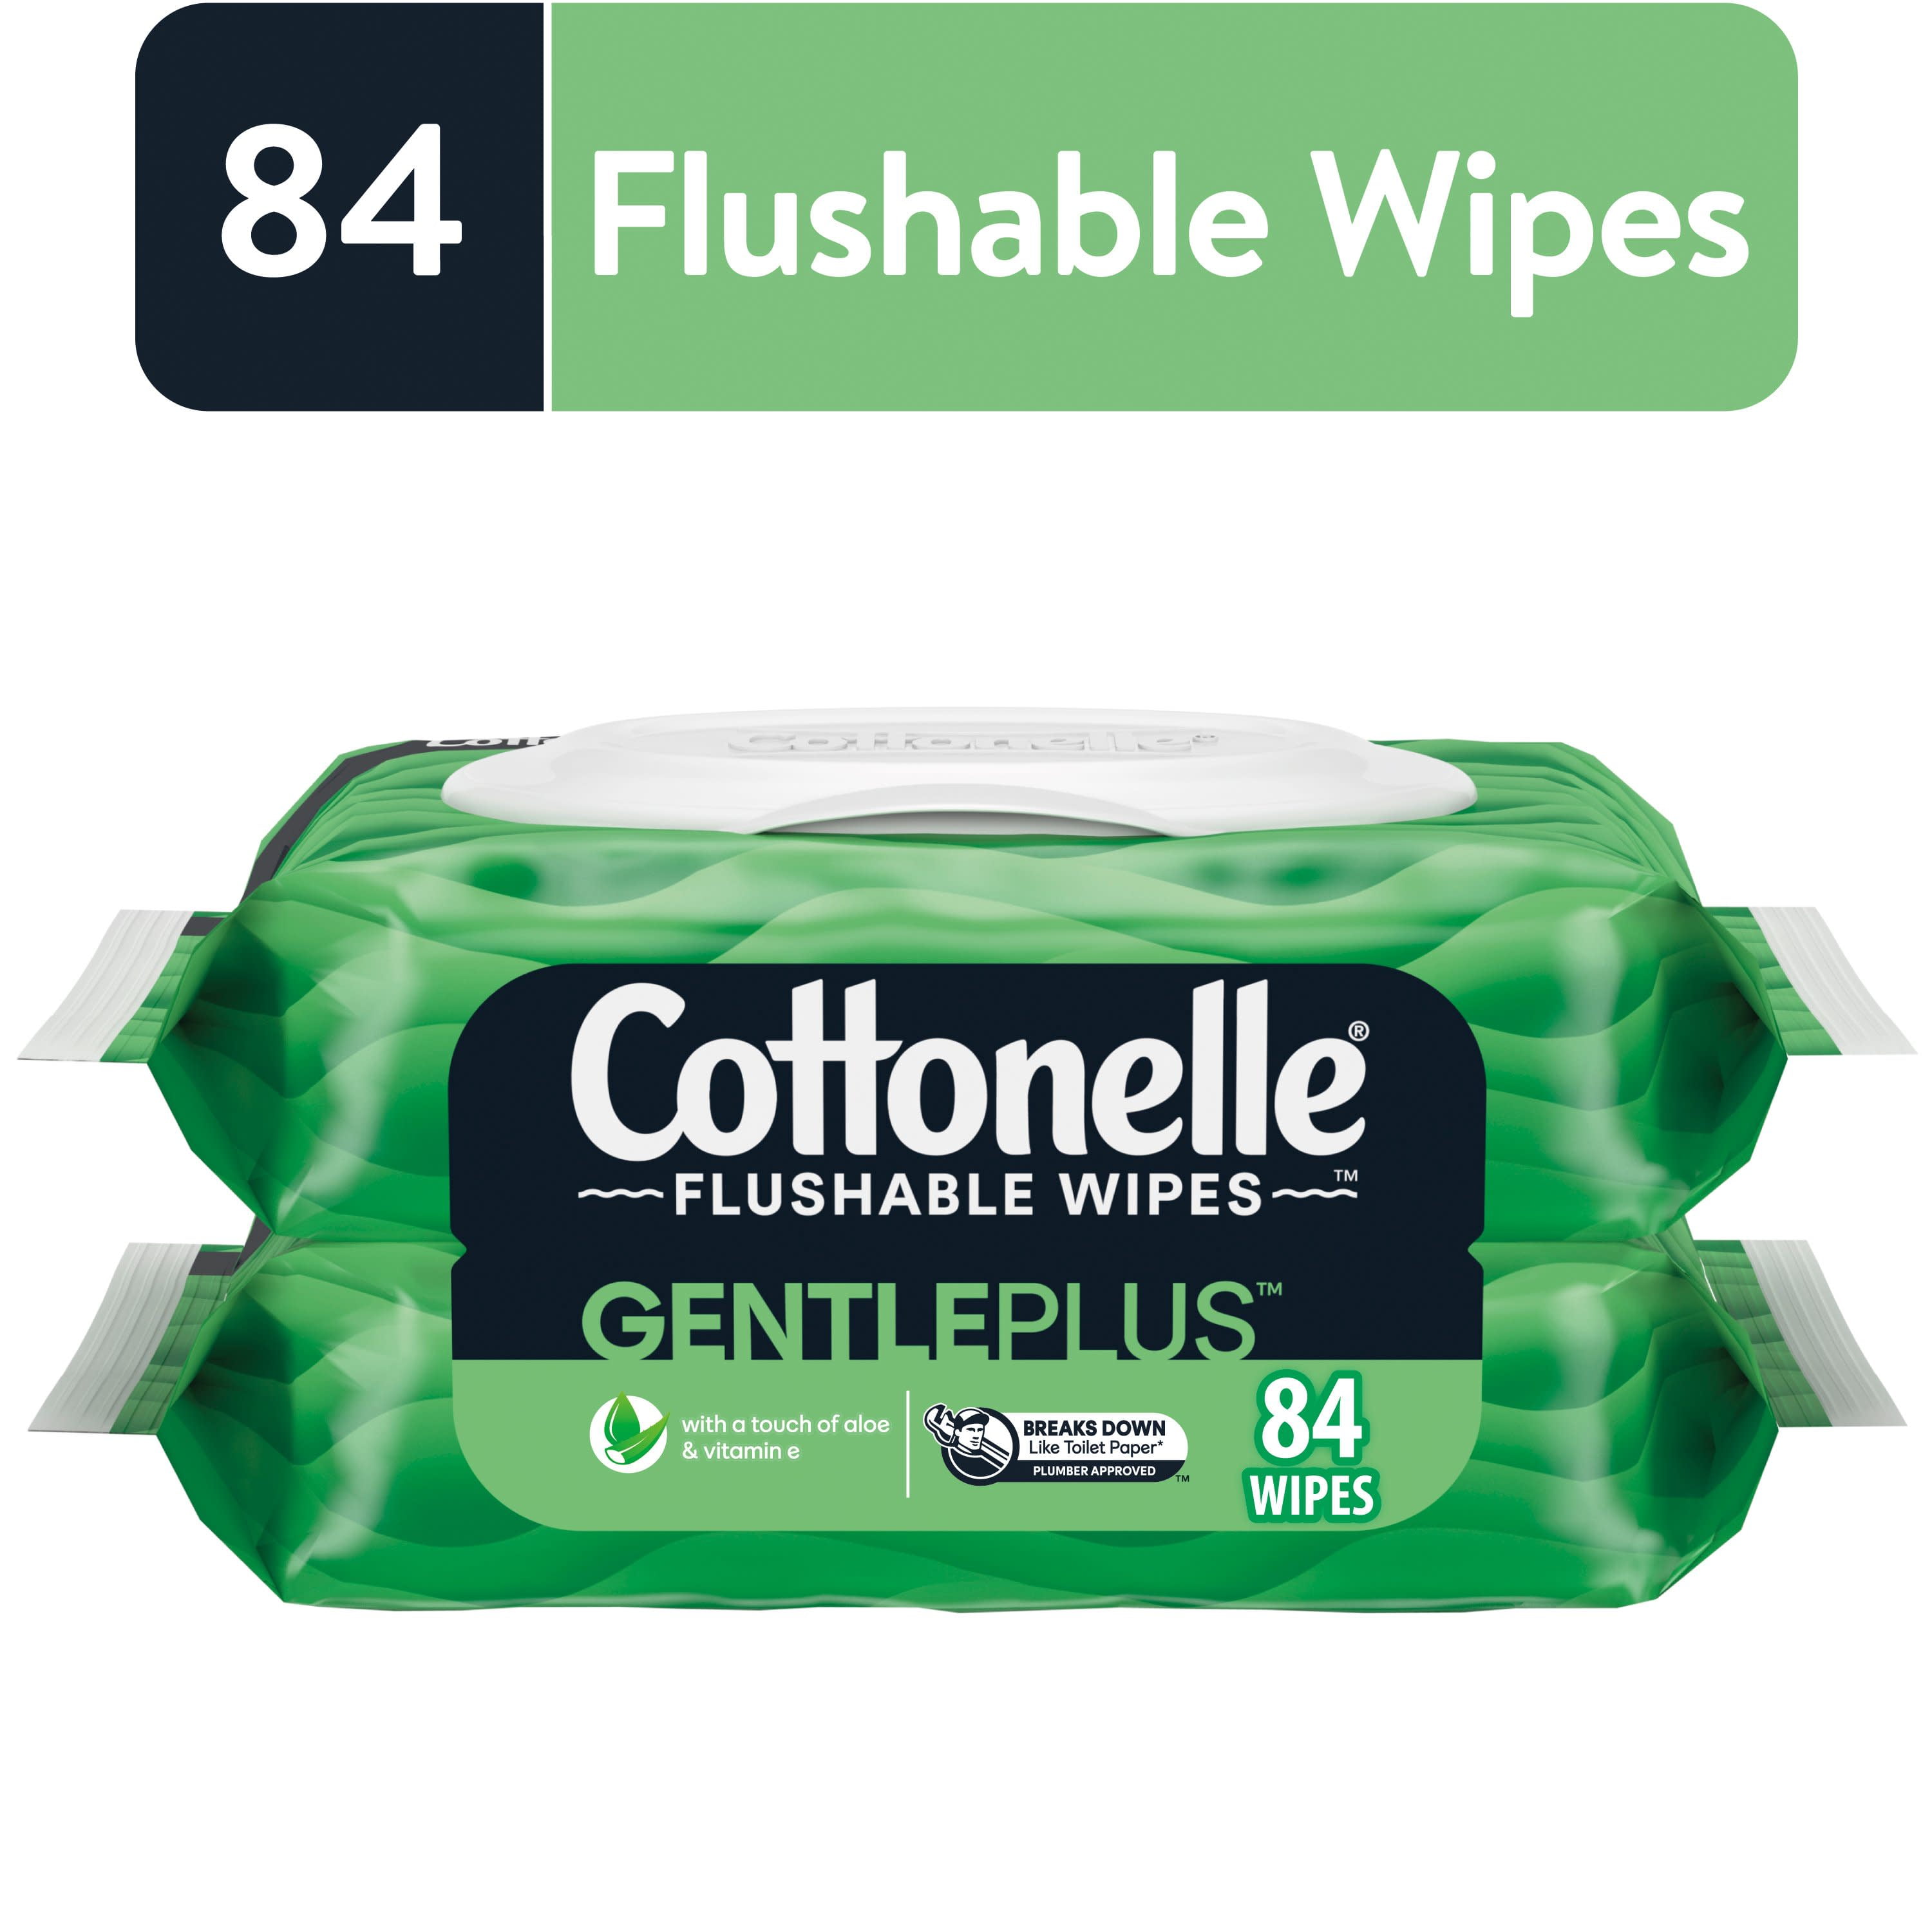 Cottonelle GentlePlus, 2 Flip-Top Packs, 42 Wipes per Pack (84 Total Flushable Wipes)